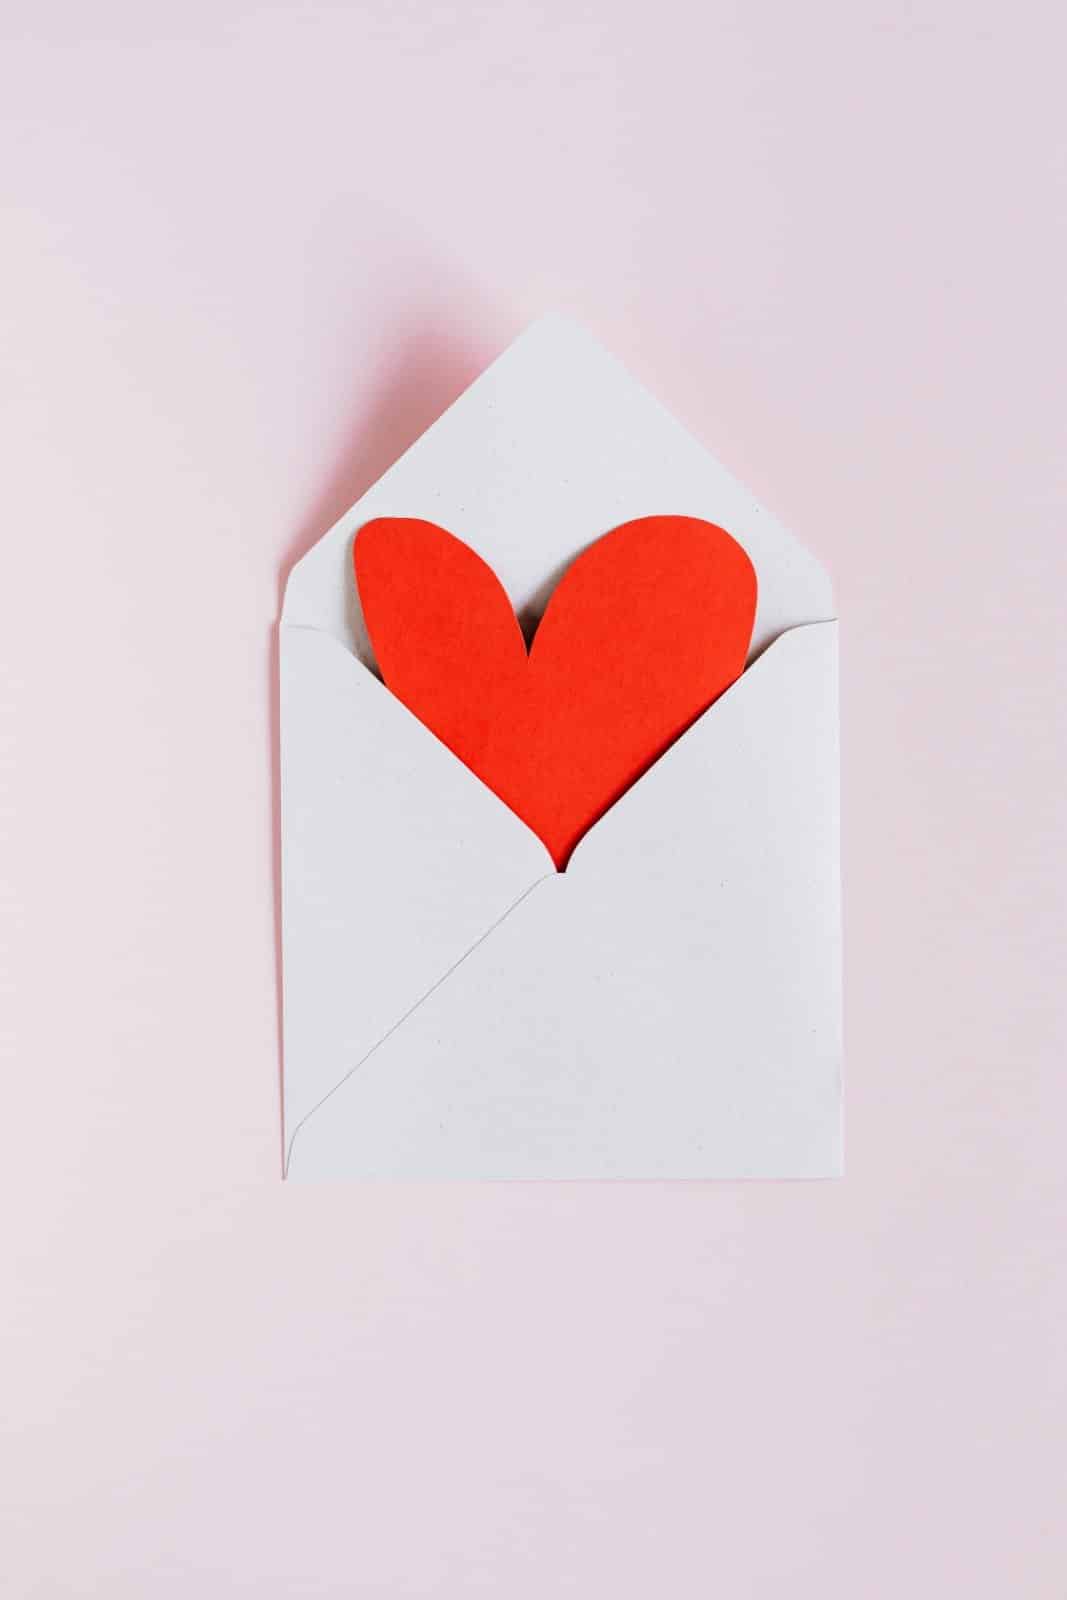 A Valentine’s Day letter containing a red paper heart ready for shredding services